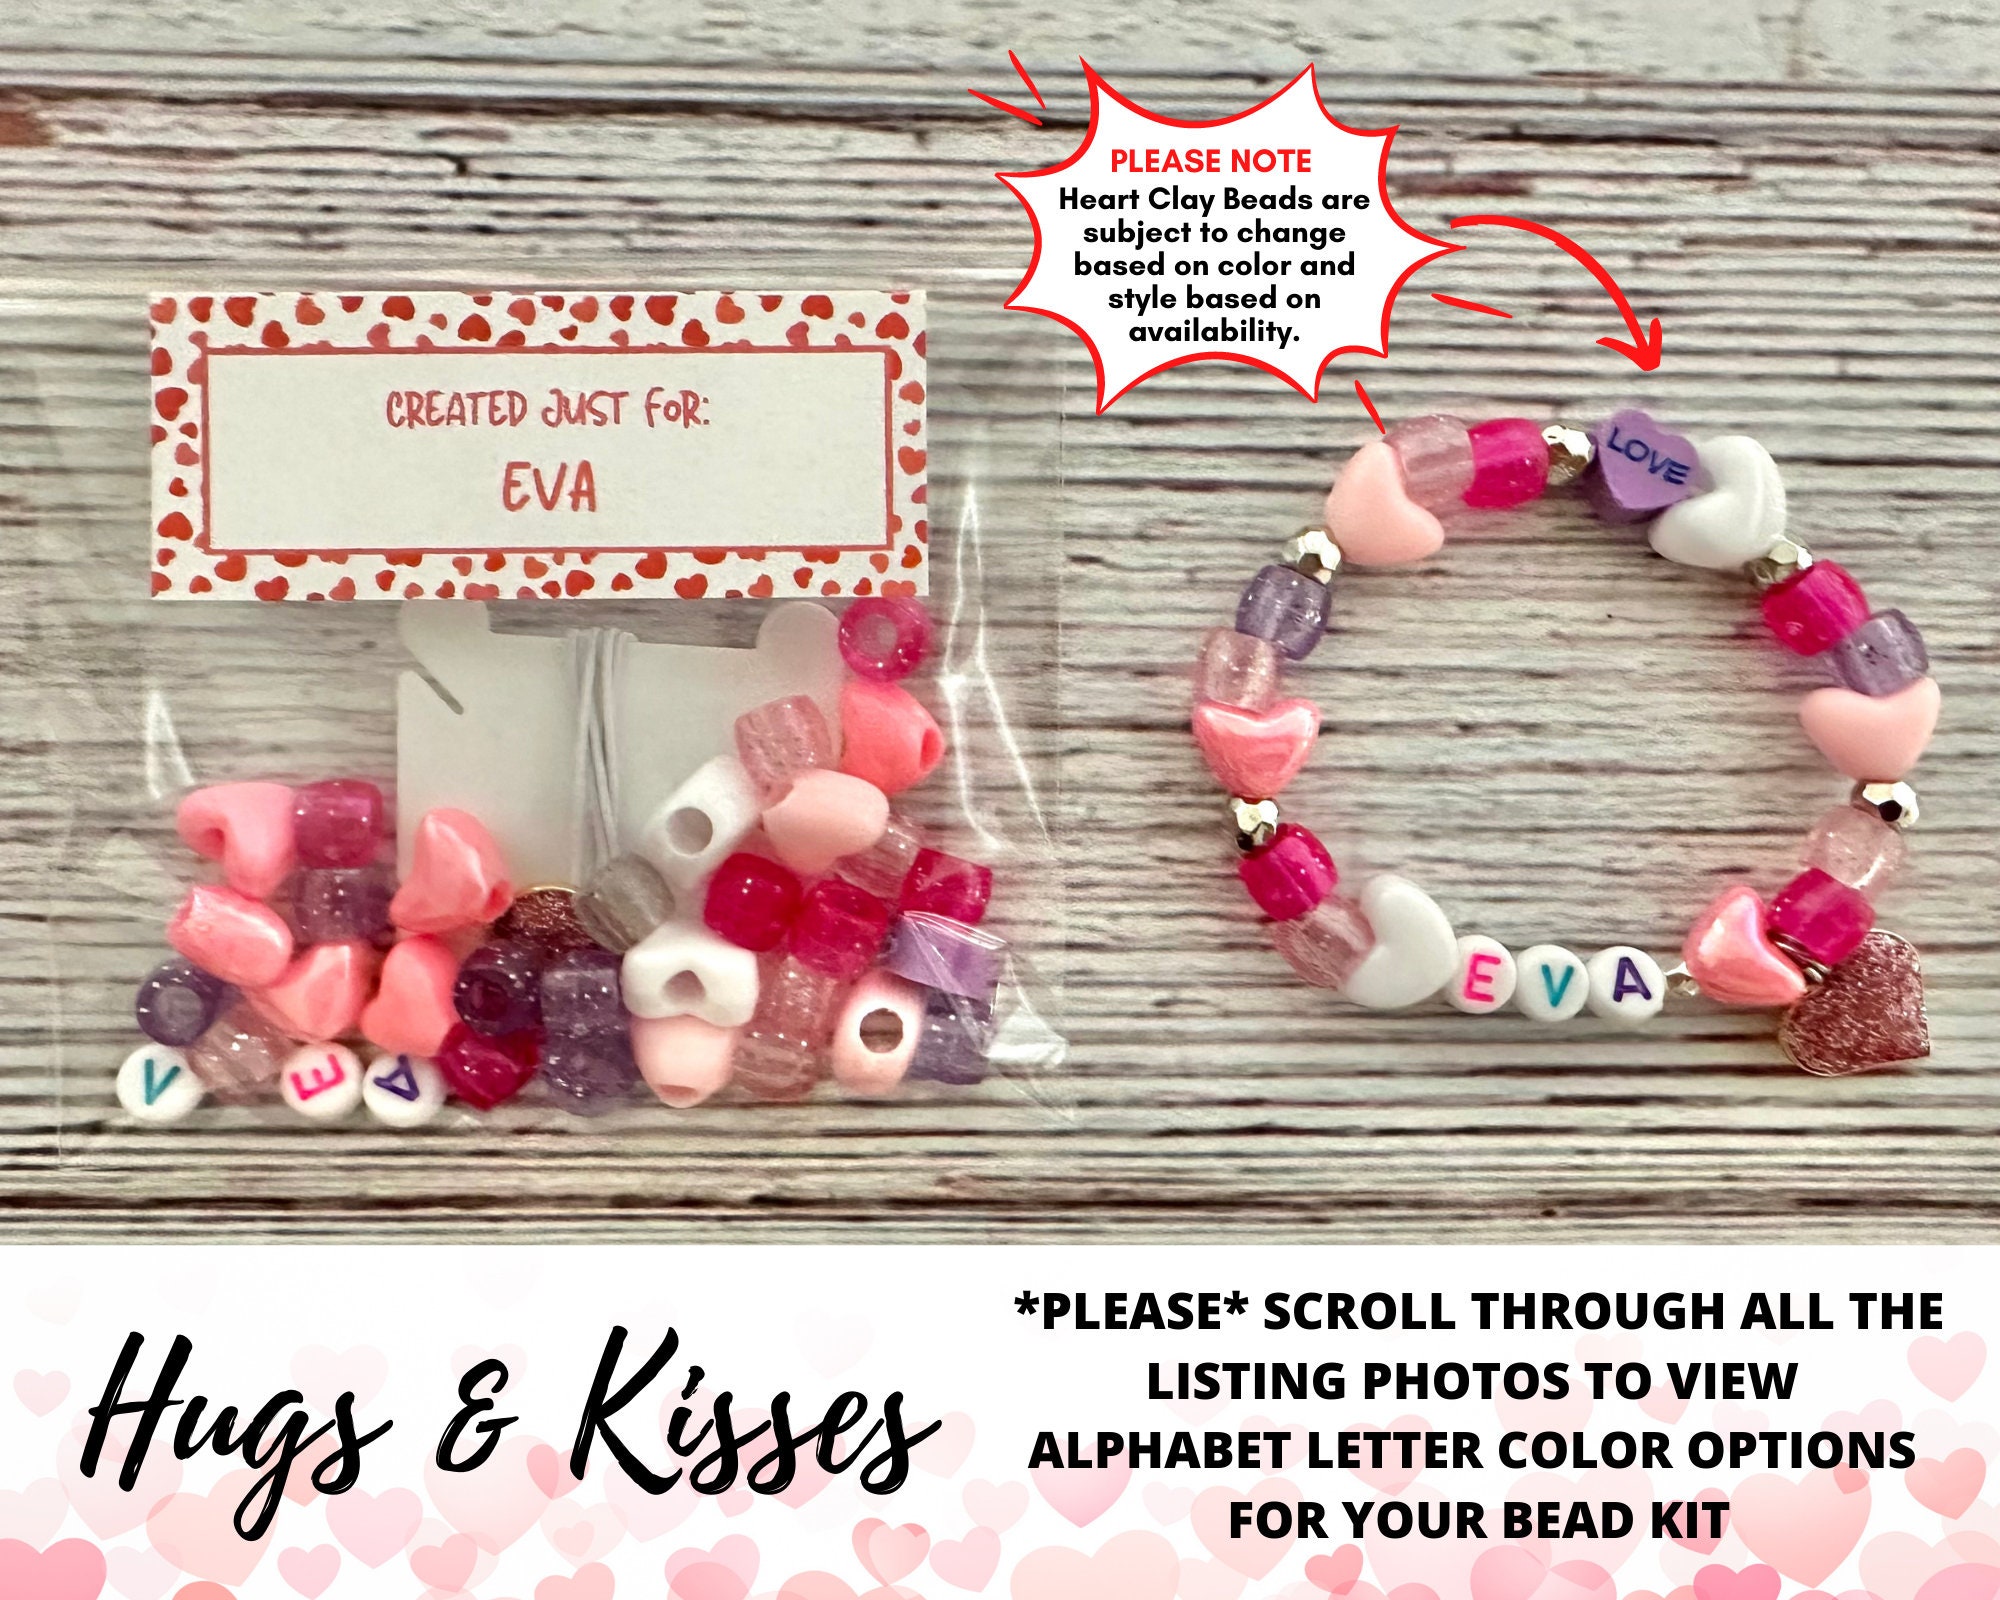 Blog :: News! :: 5 DIY Valentine's Day Gifts Ideas: How to Make Beaded  Bracelets with Heart Beads